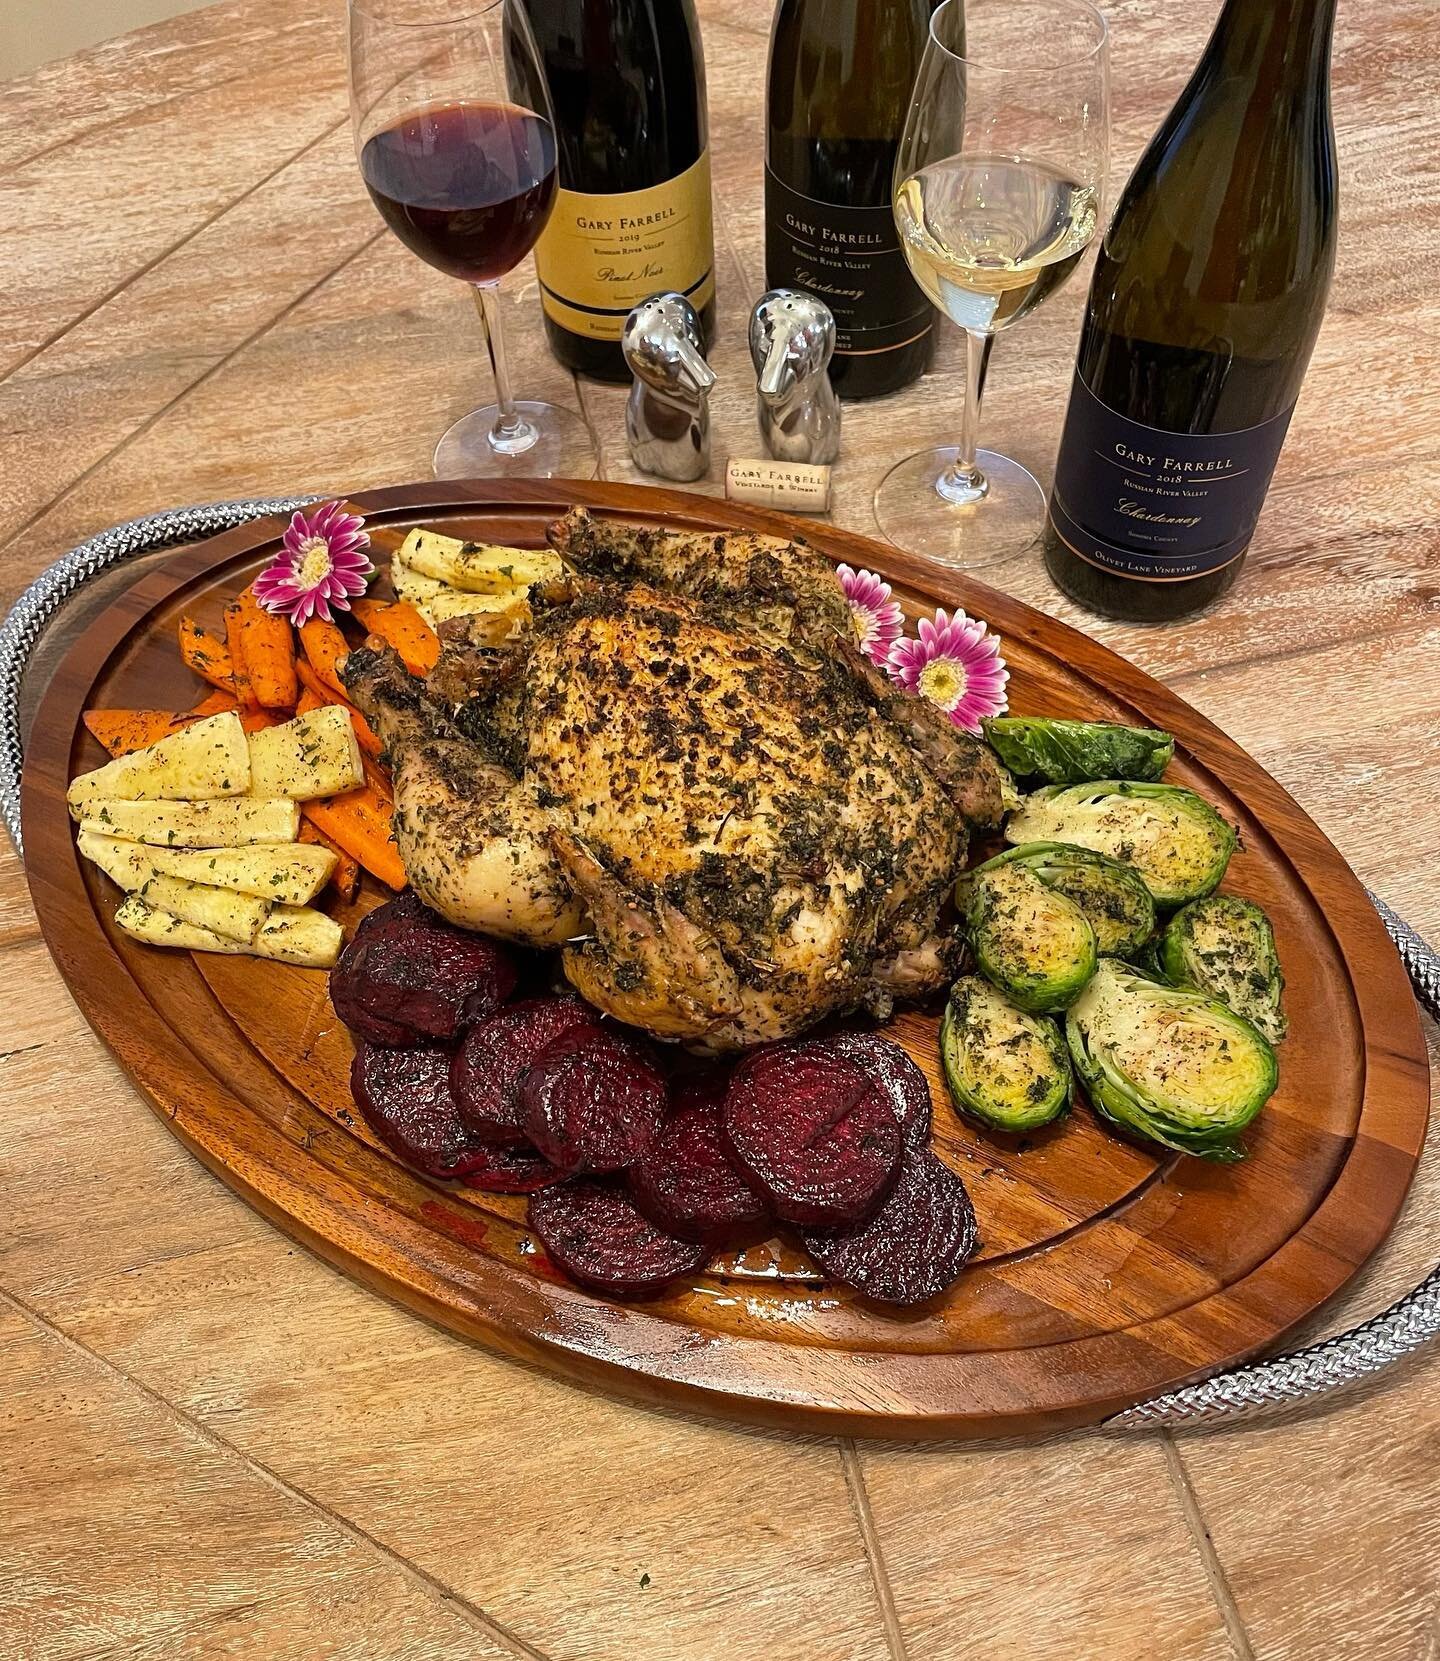 🌟 Roasted chicken is perhaps everyone&rsquo;s favorite Sunday or 🐣Easter holiday dinner! Roasted veggies too 🥕parsnips, carrots, beets, Brussels sprouts 

🌟If you&rsquo;re like me, I happen to love both red and white wine to compliment the overal